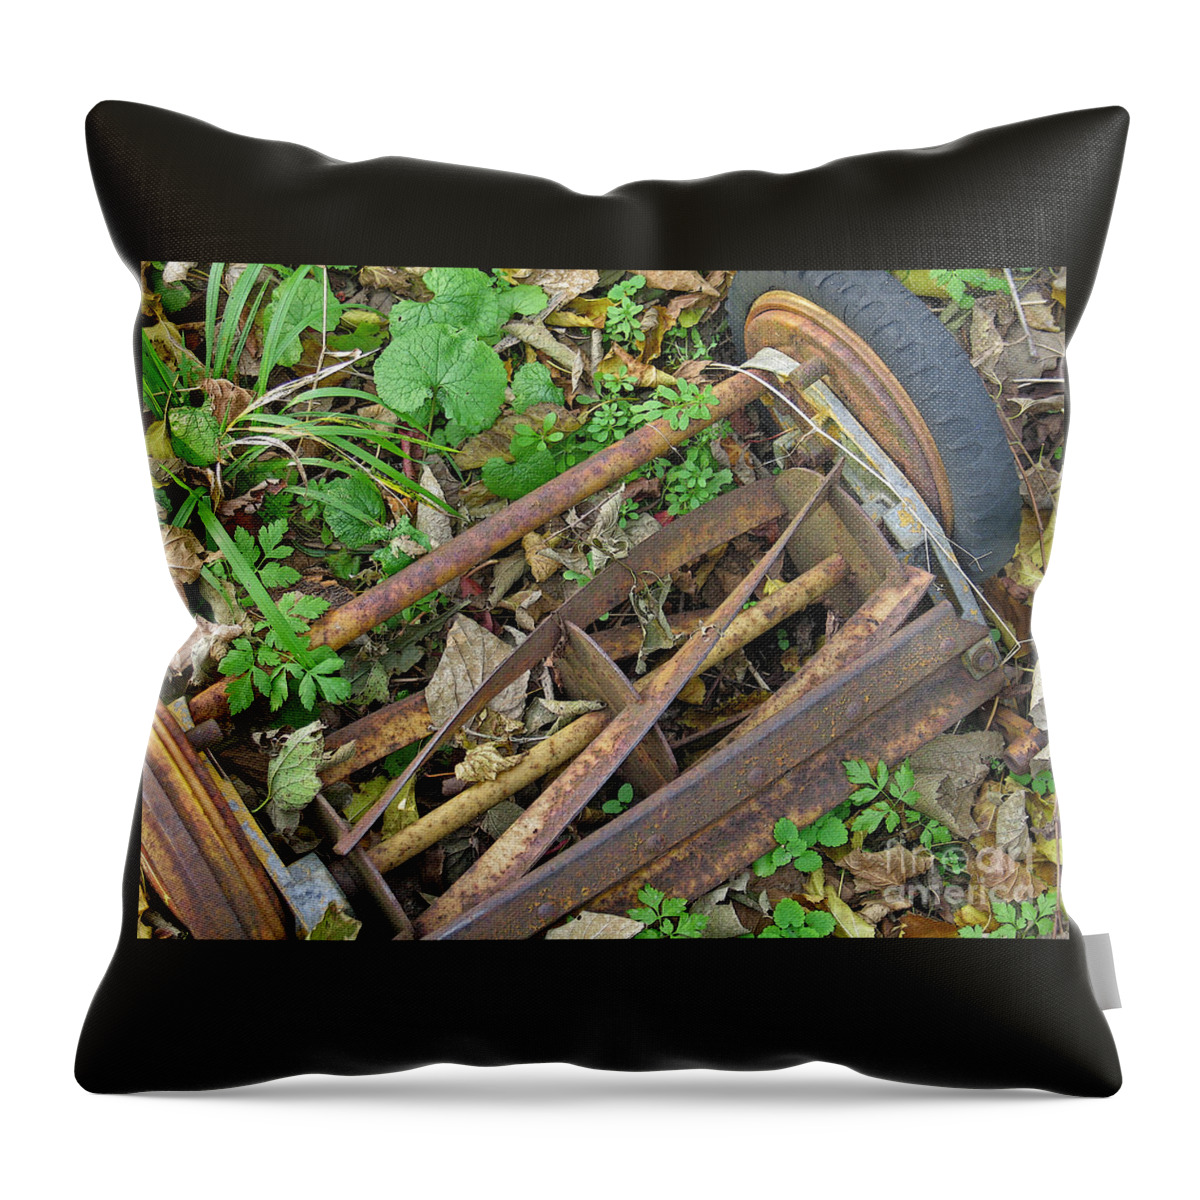 Lawnmower Throw Pillow featuring the photograph Mows No More by Ann Horn